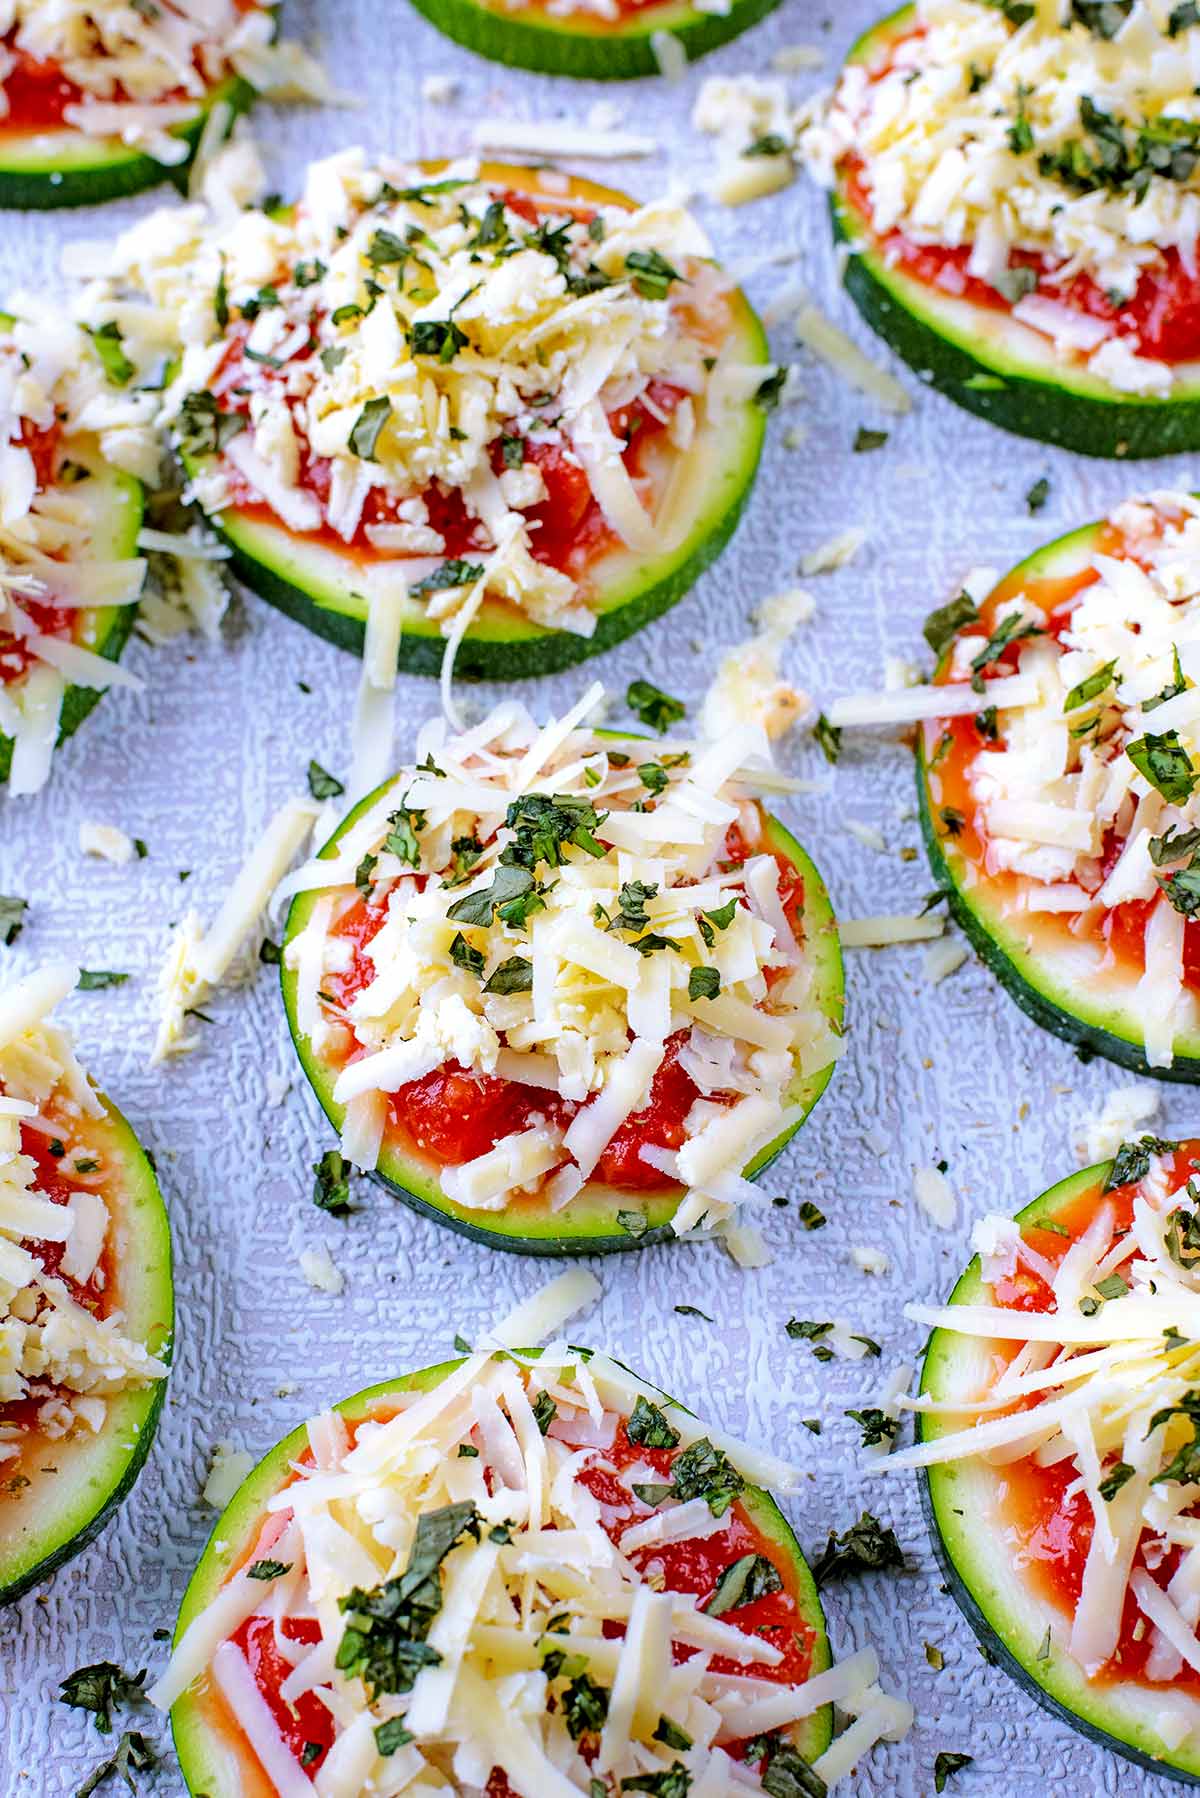 Slices of courgette with tomato and cheese on top.